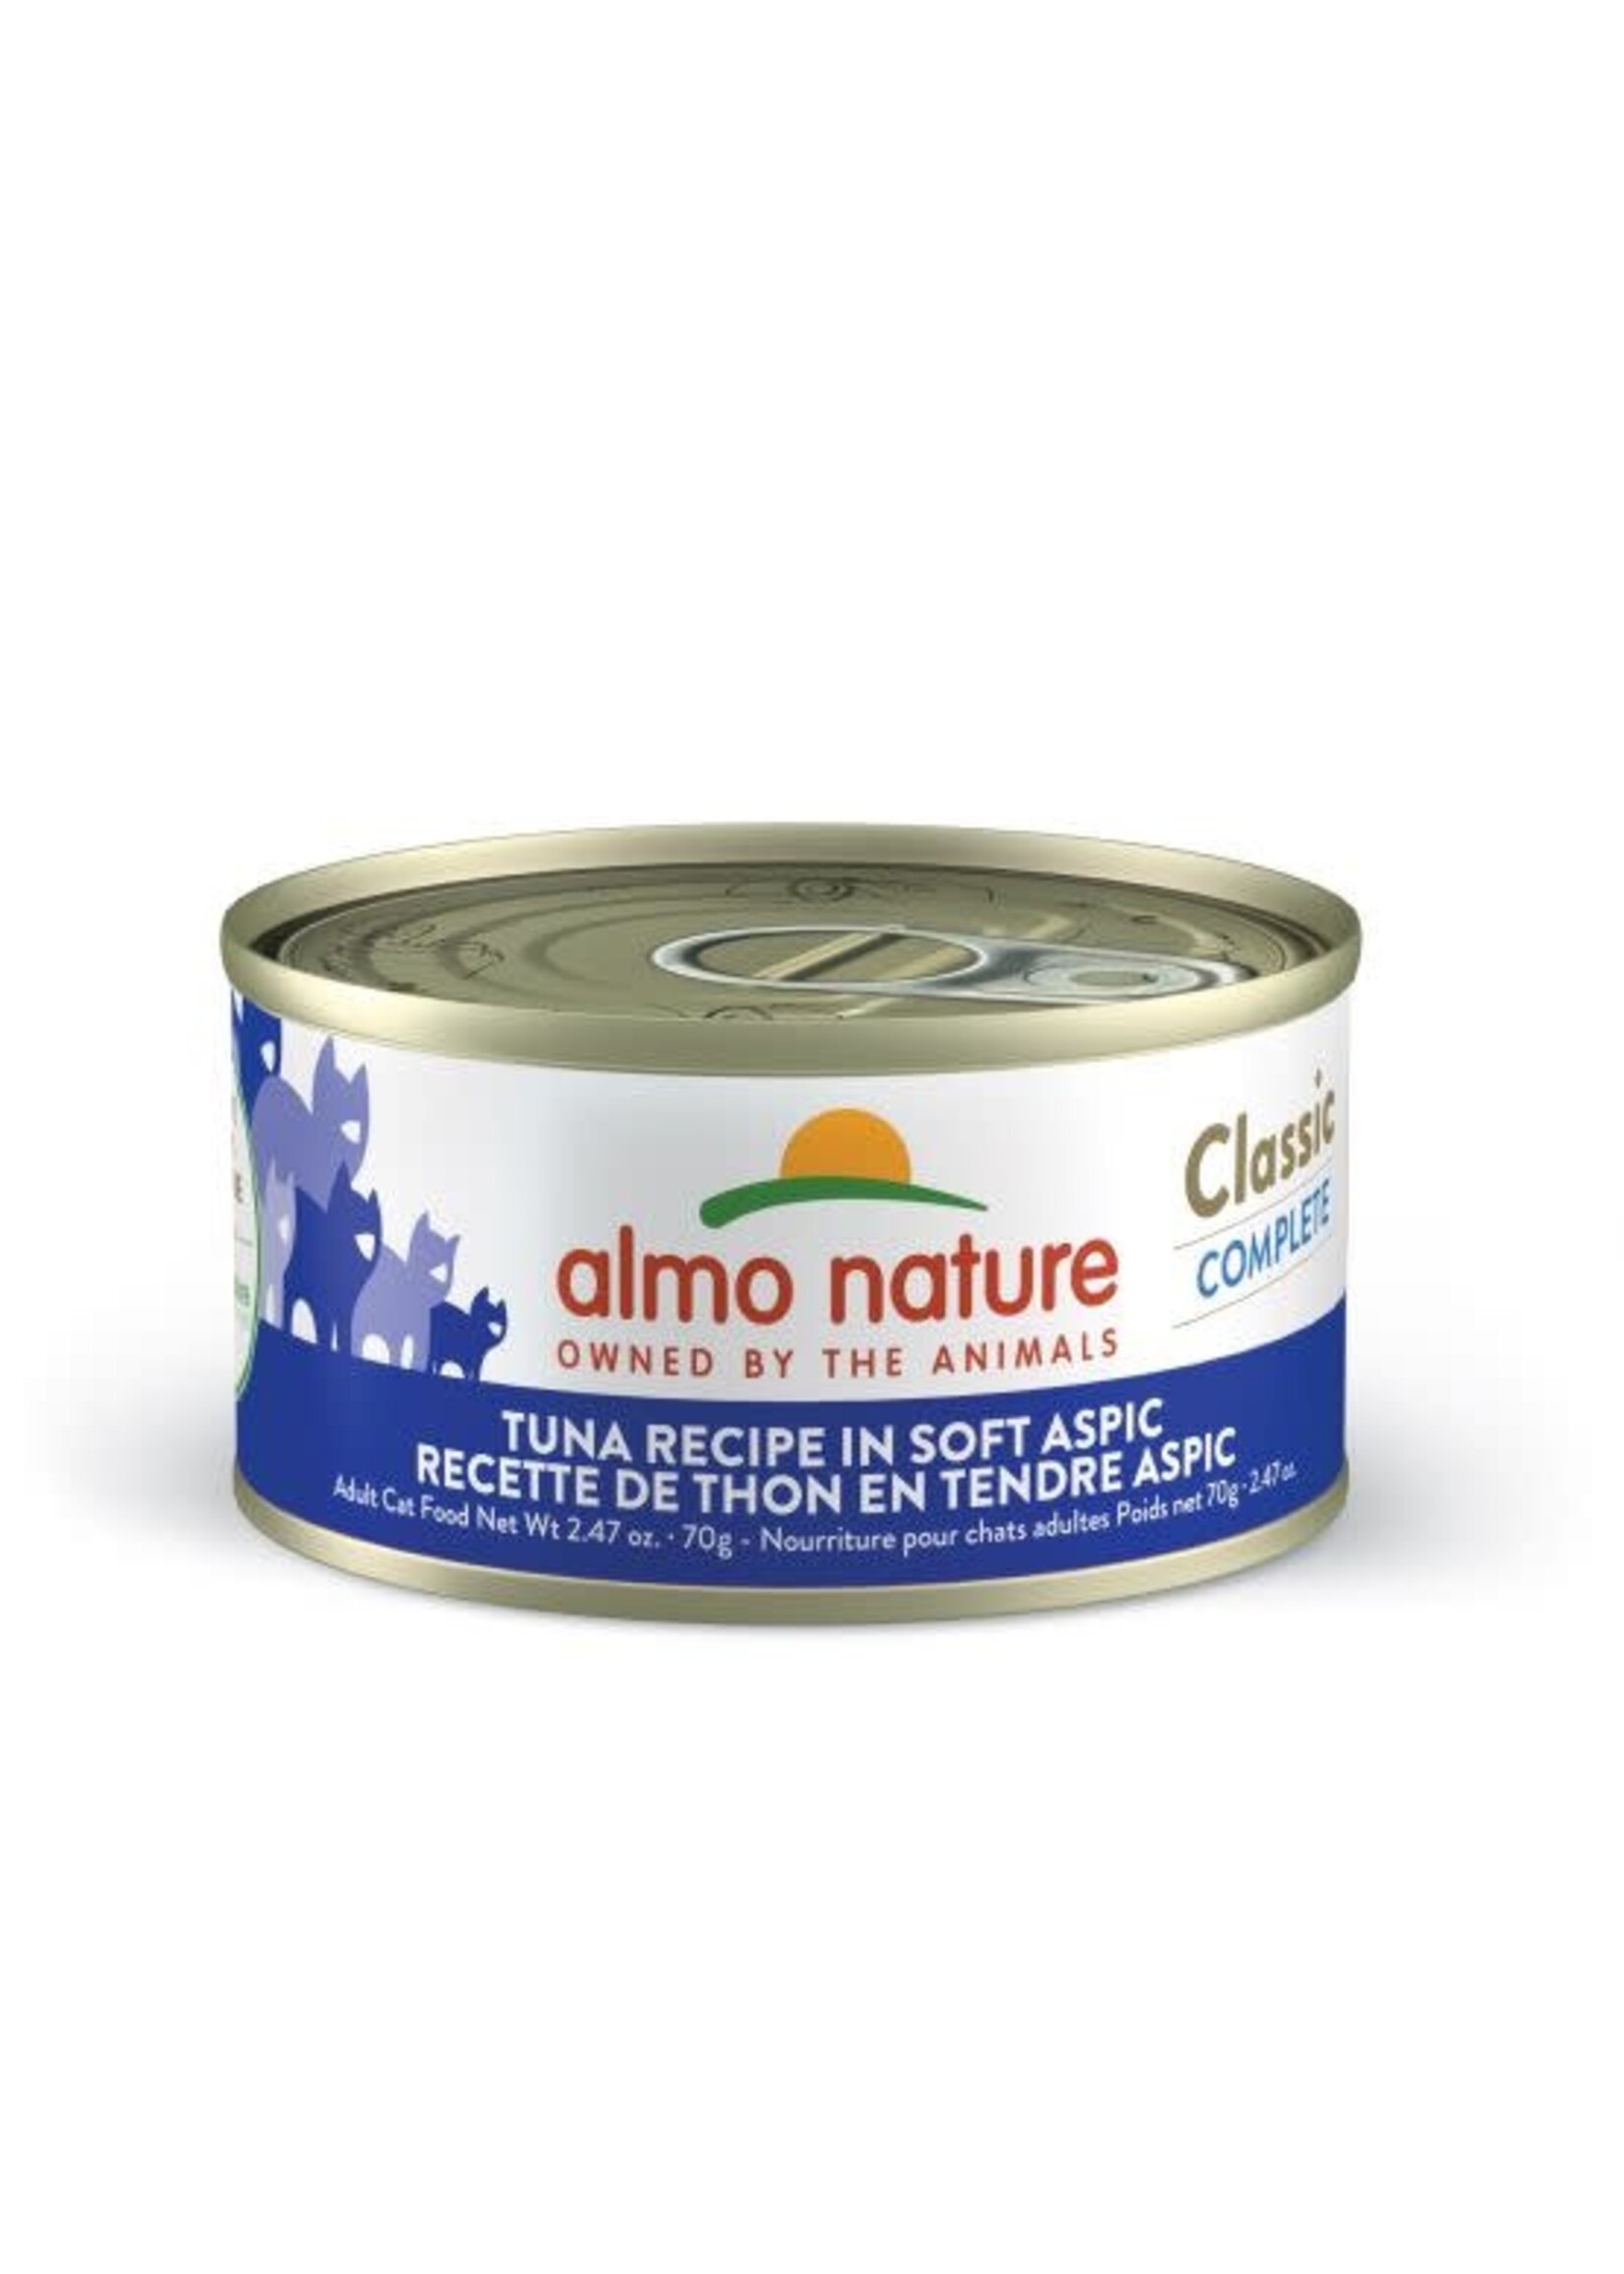 Almo Nature Almo classic complete chat- Thon en tendre aspic 70gr